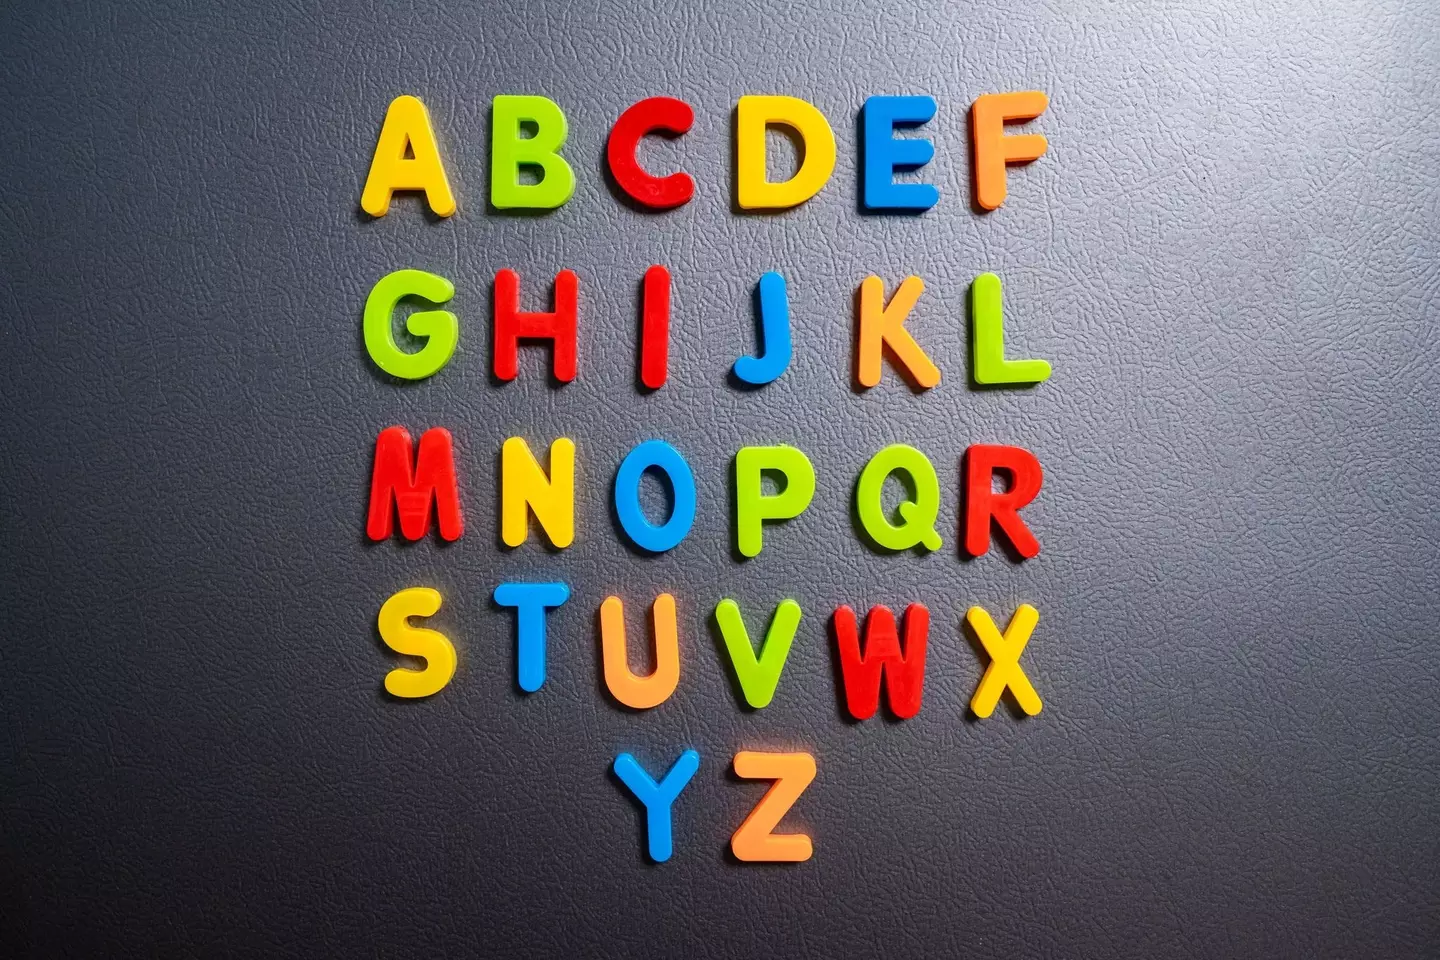 That's right, there are supposed to be 27 letters. Getty Stock Images